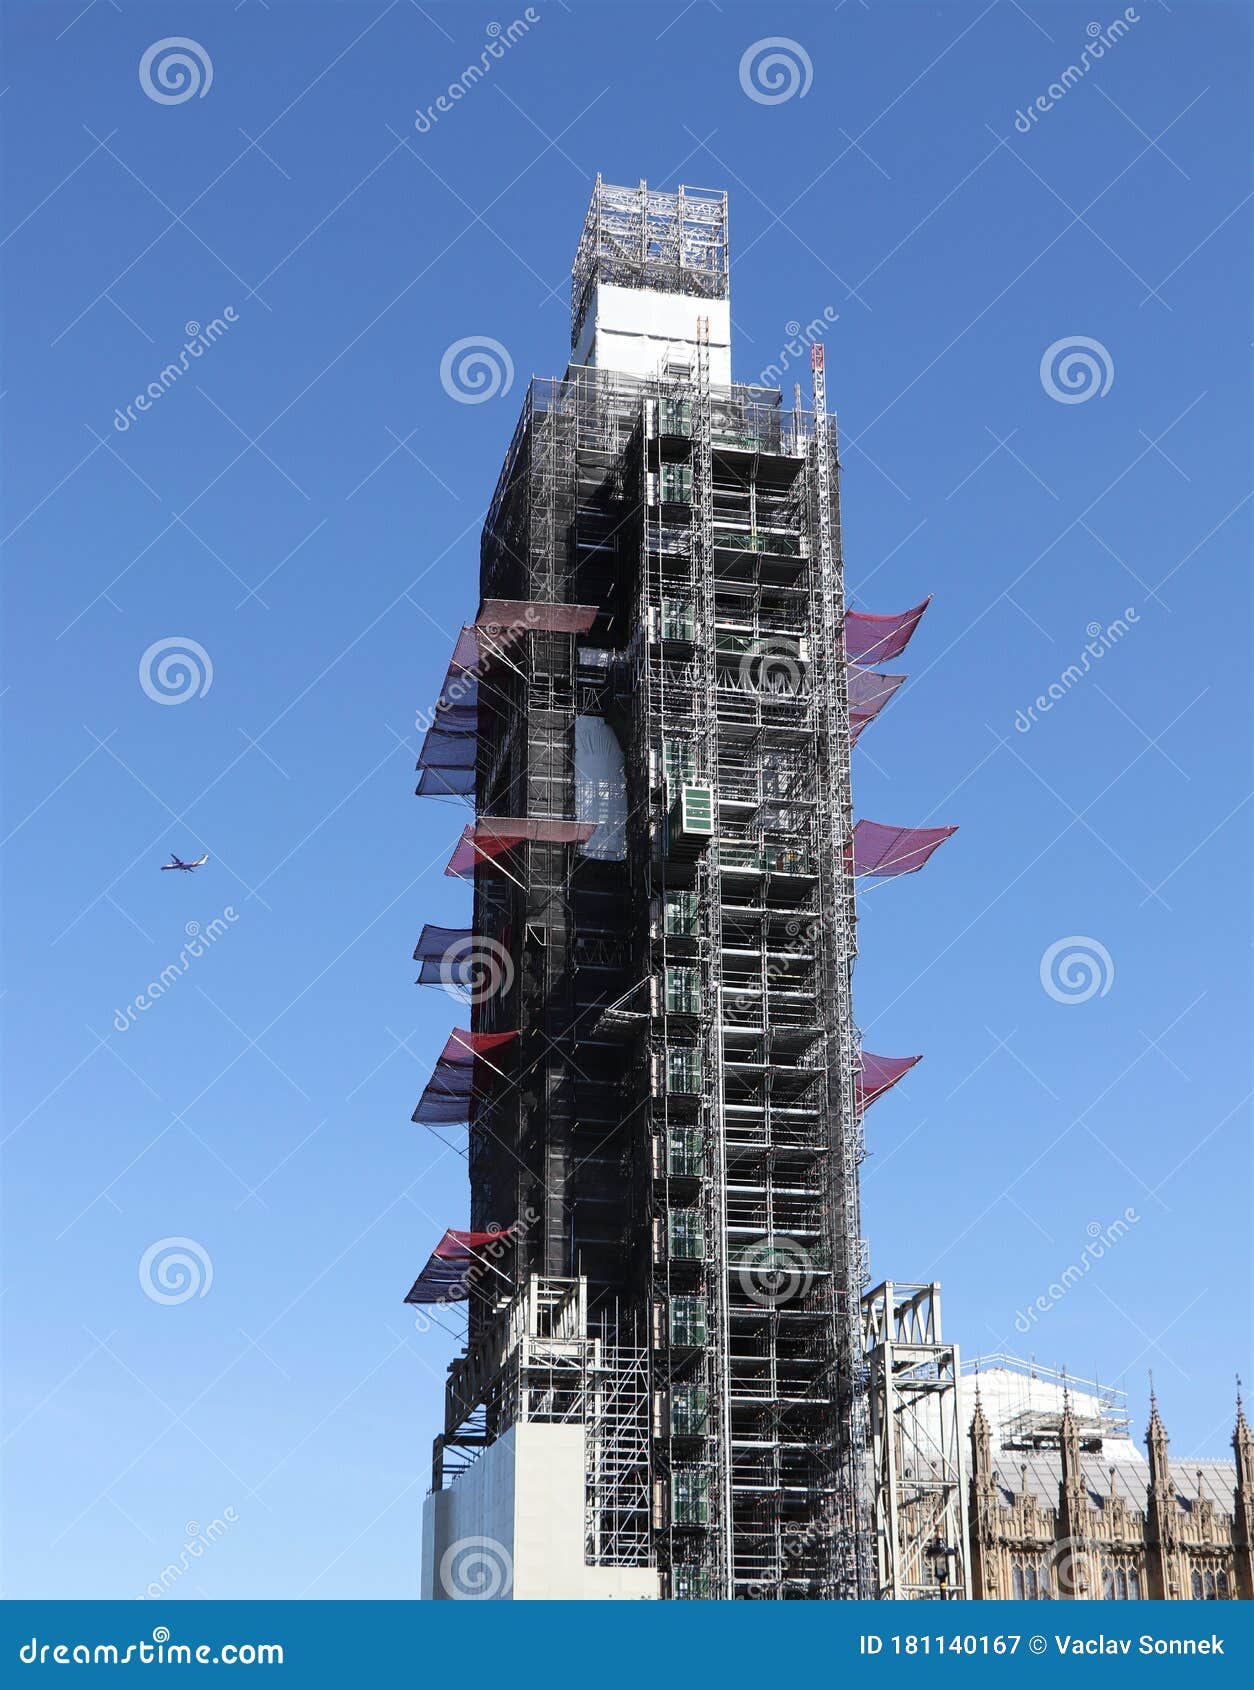 detail on big ben, part of westminster palace, who is under reconstruction. tourists must wait for this magnificent landmark of